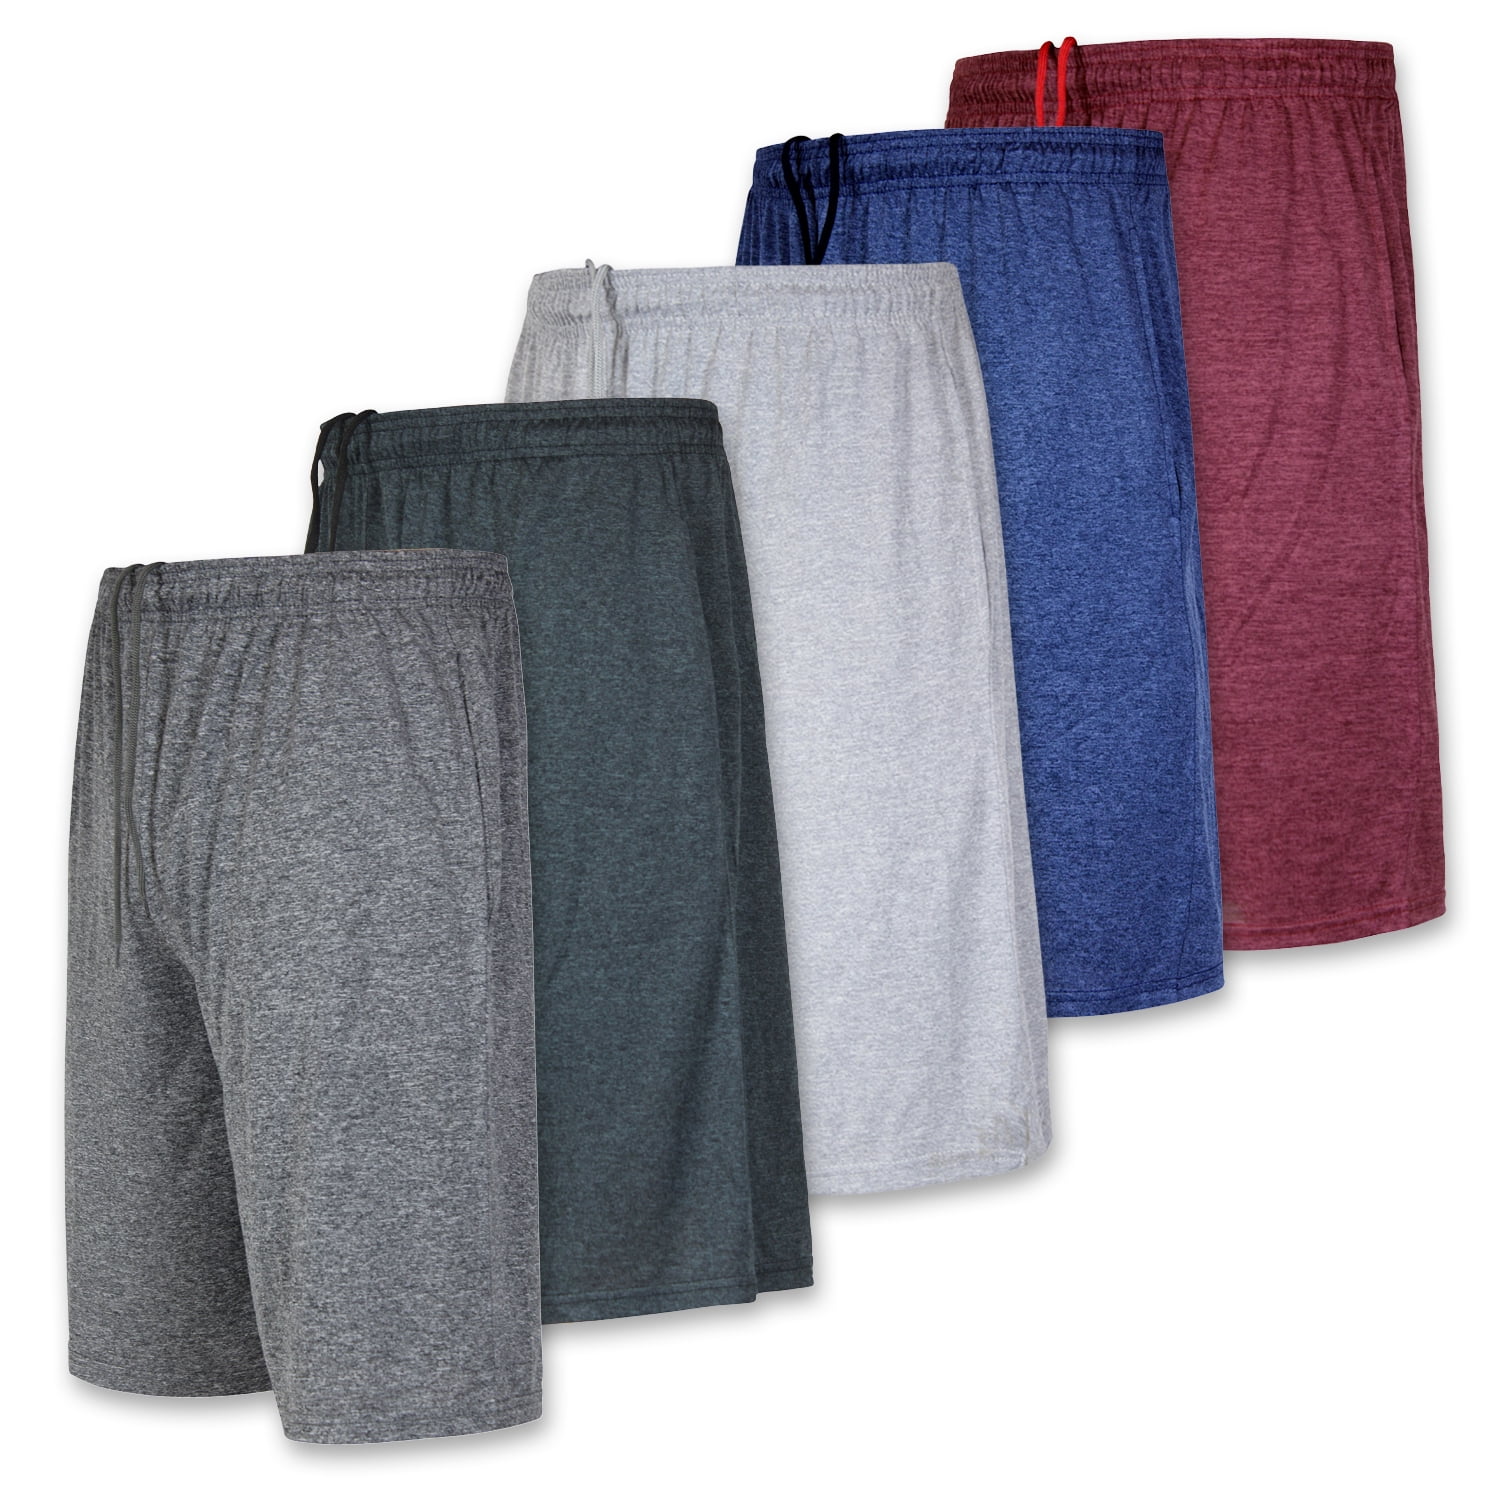 5 Pack:Mens Dry-Fit Sweat Resistant Active Athletic Performance Shorts 